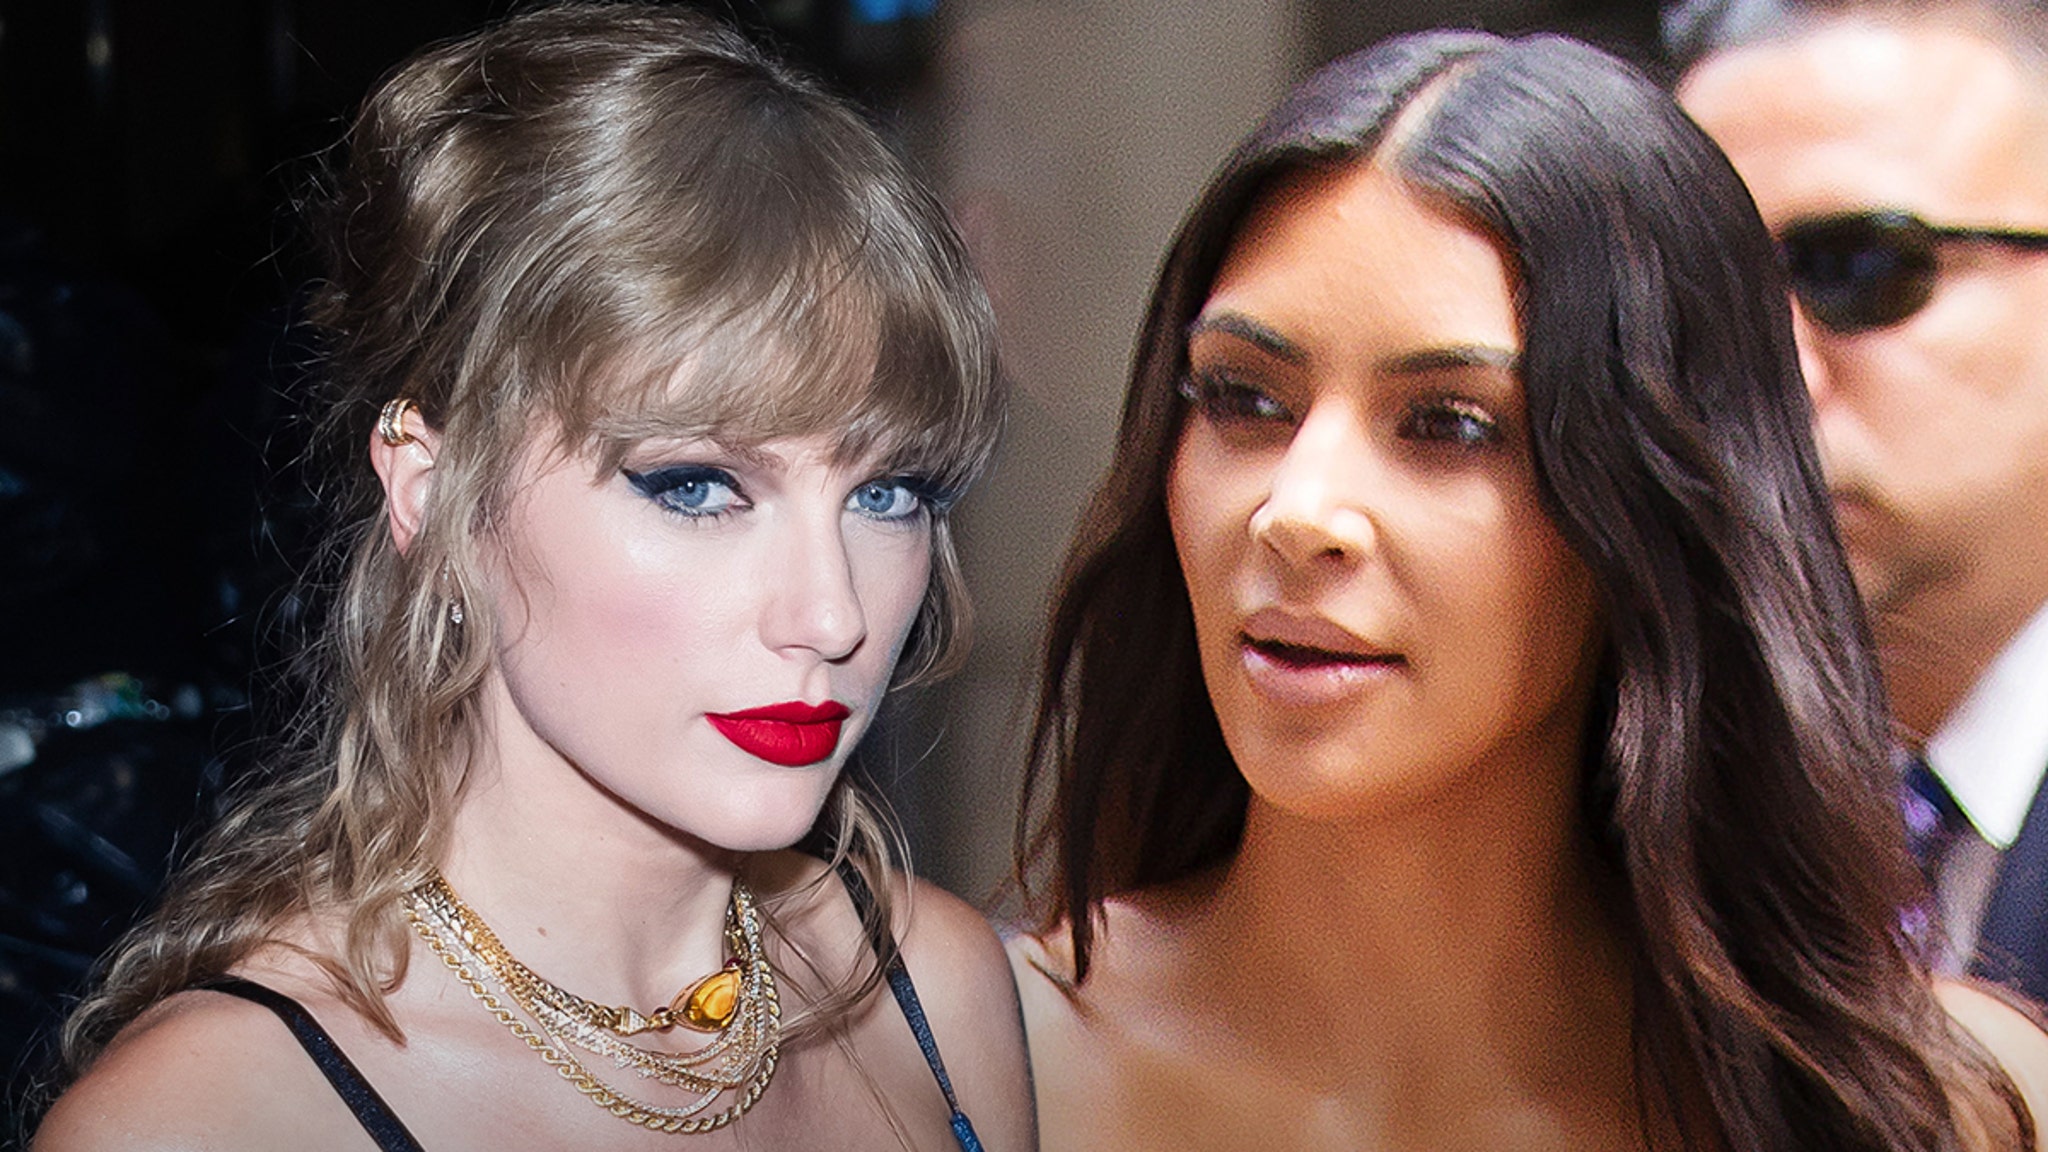 Taylor Swift Seems to Label Kim Kardashian a Bully In New Song